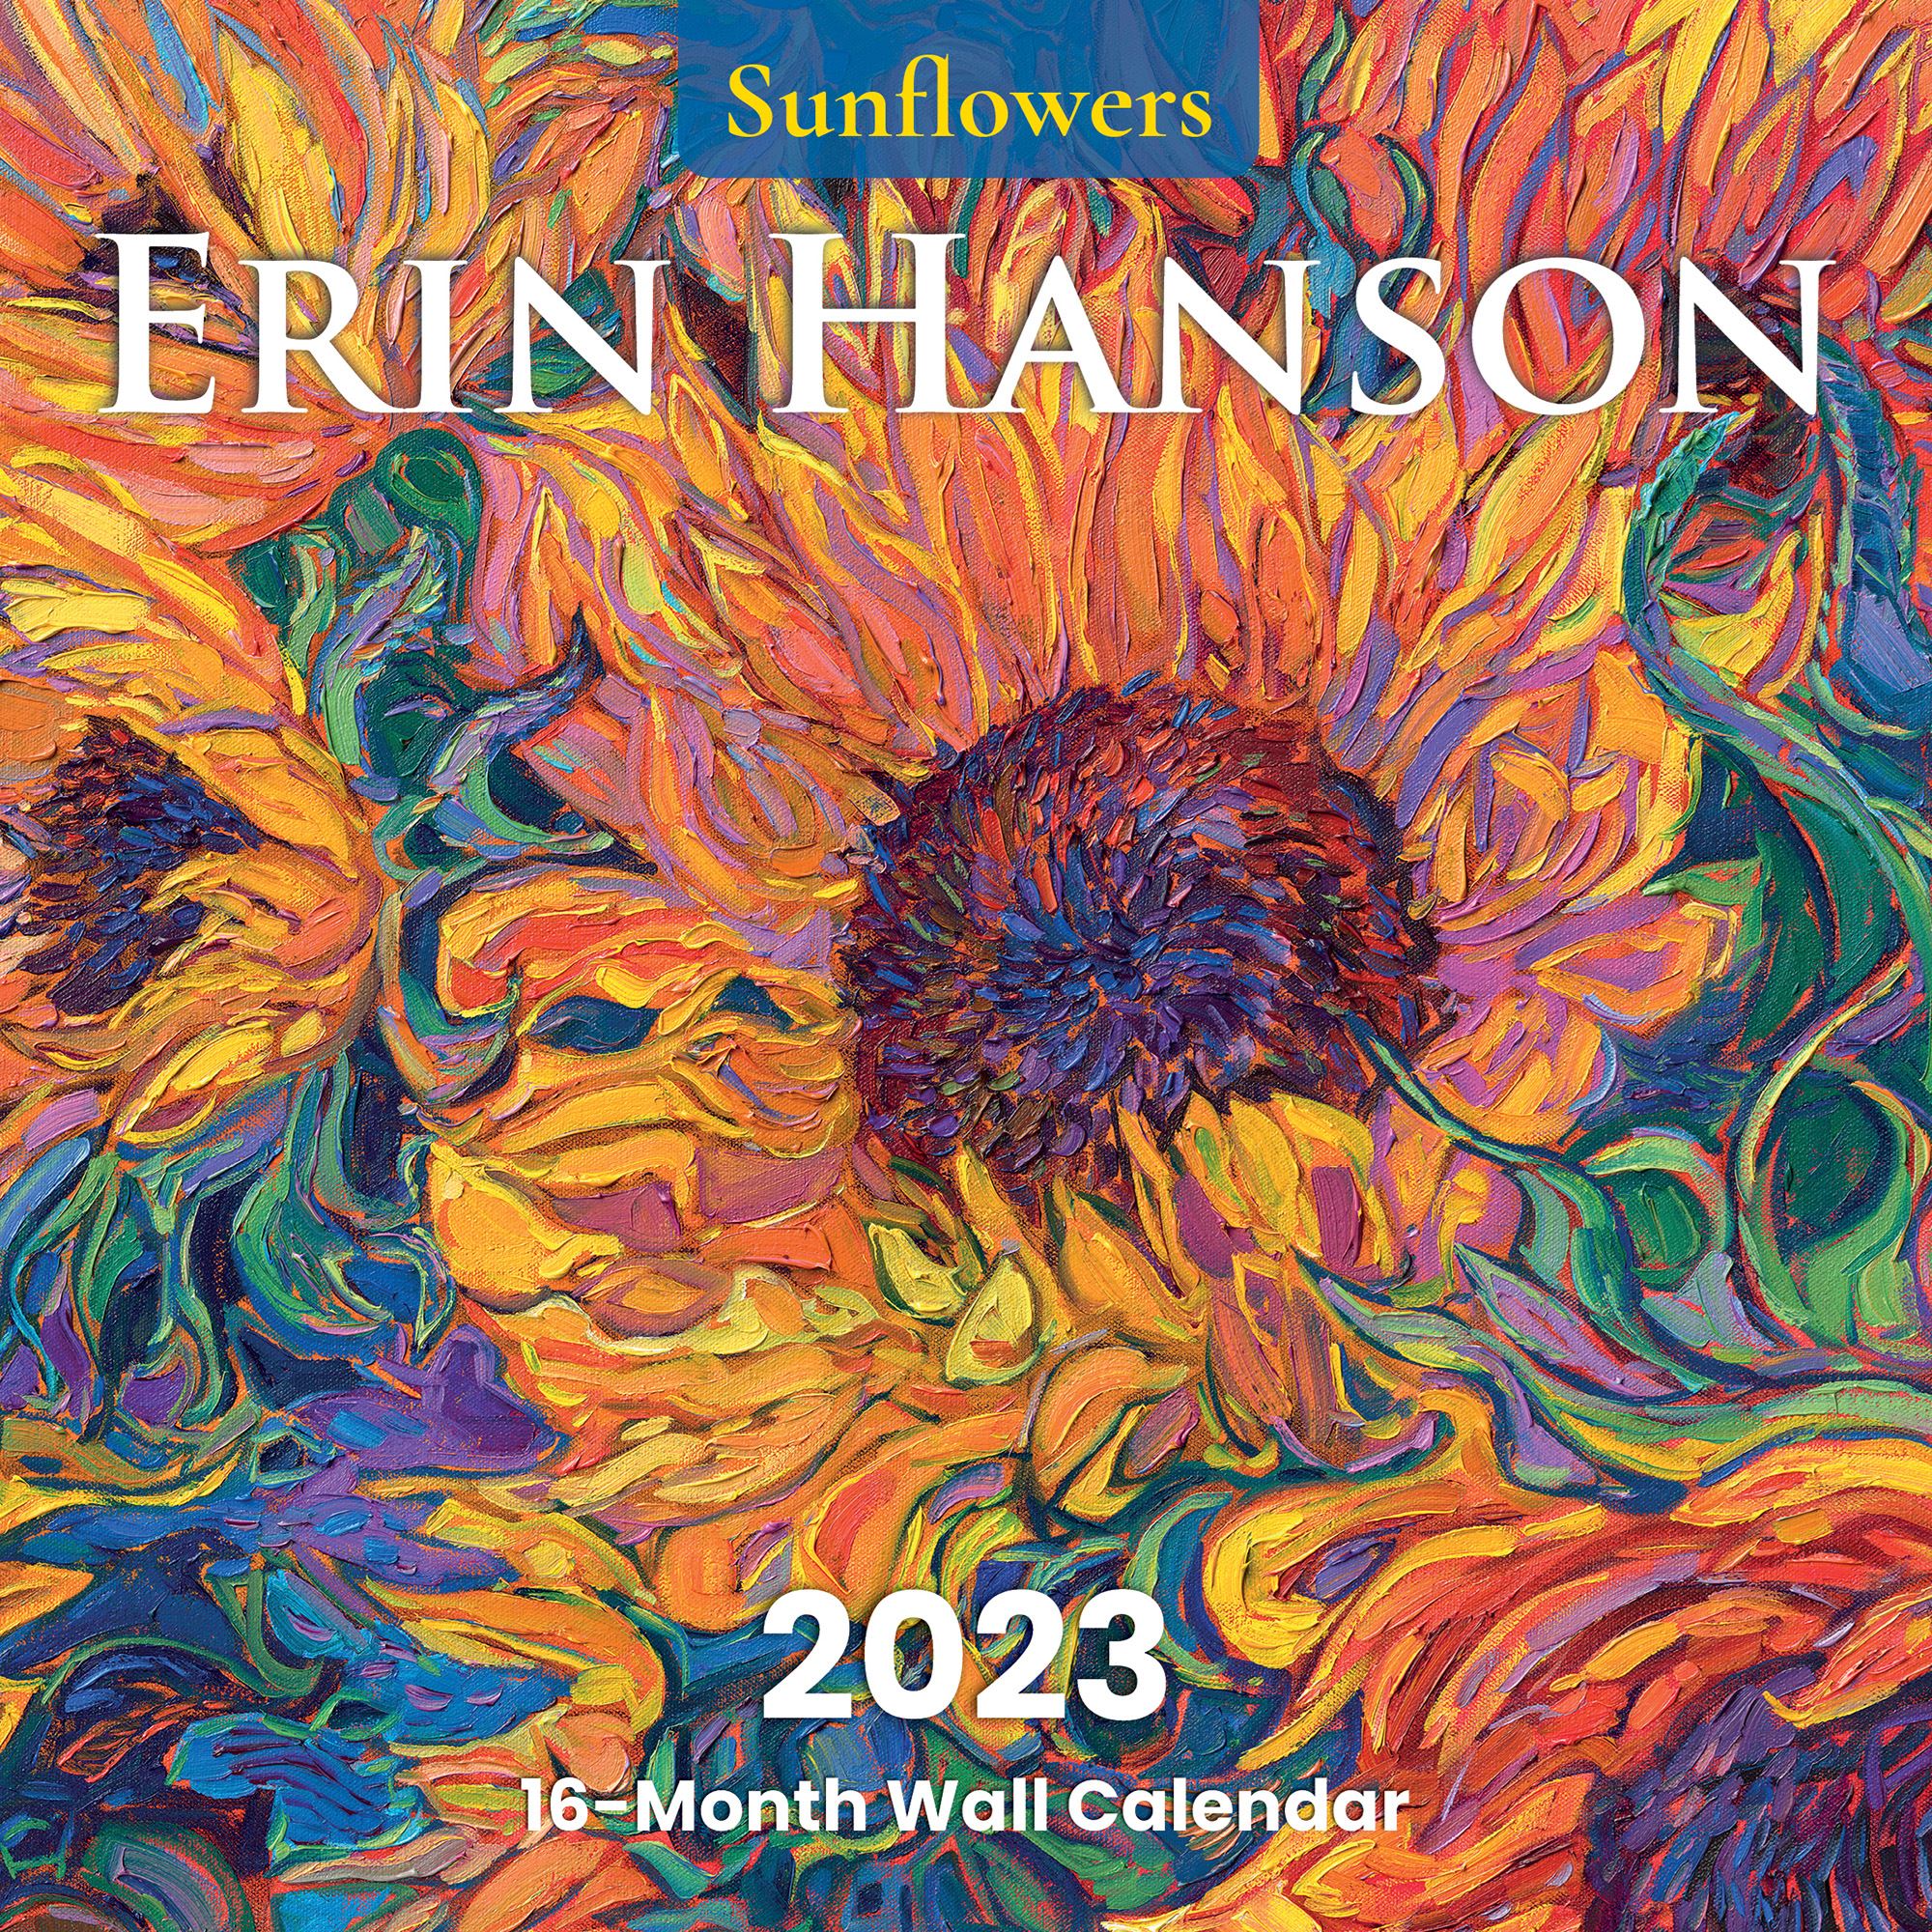  2023 Calendars  This year we have 6 options for 2023 wall calendars -- available while supplies last! You can purchase Erin Hanson 2023 calendars from our giftshop on this website. 